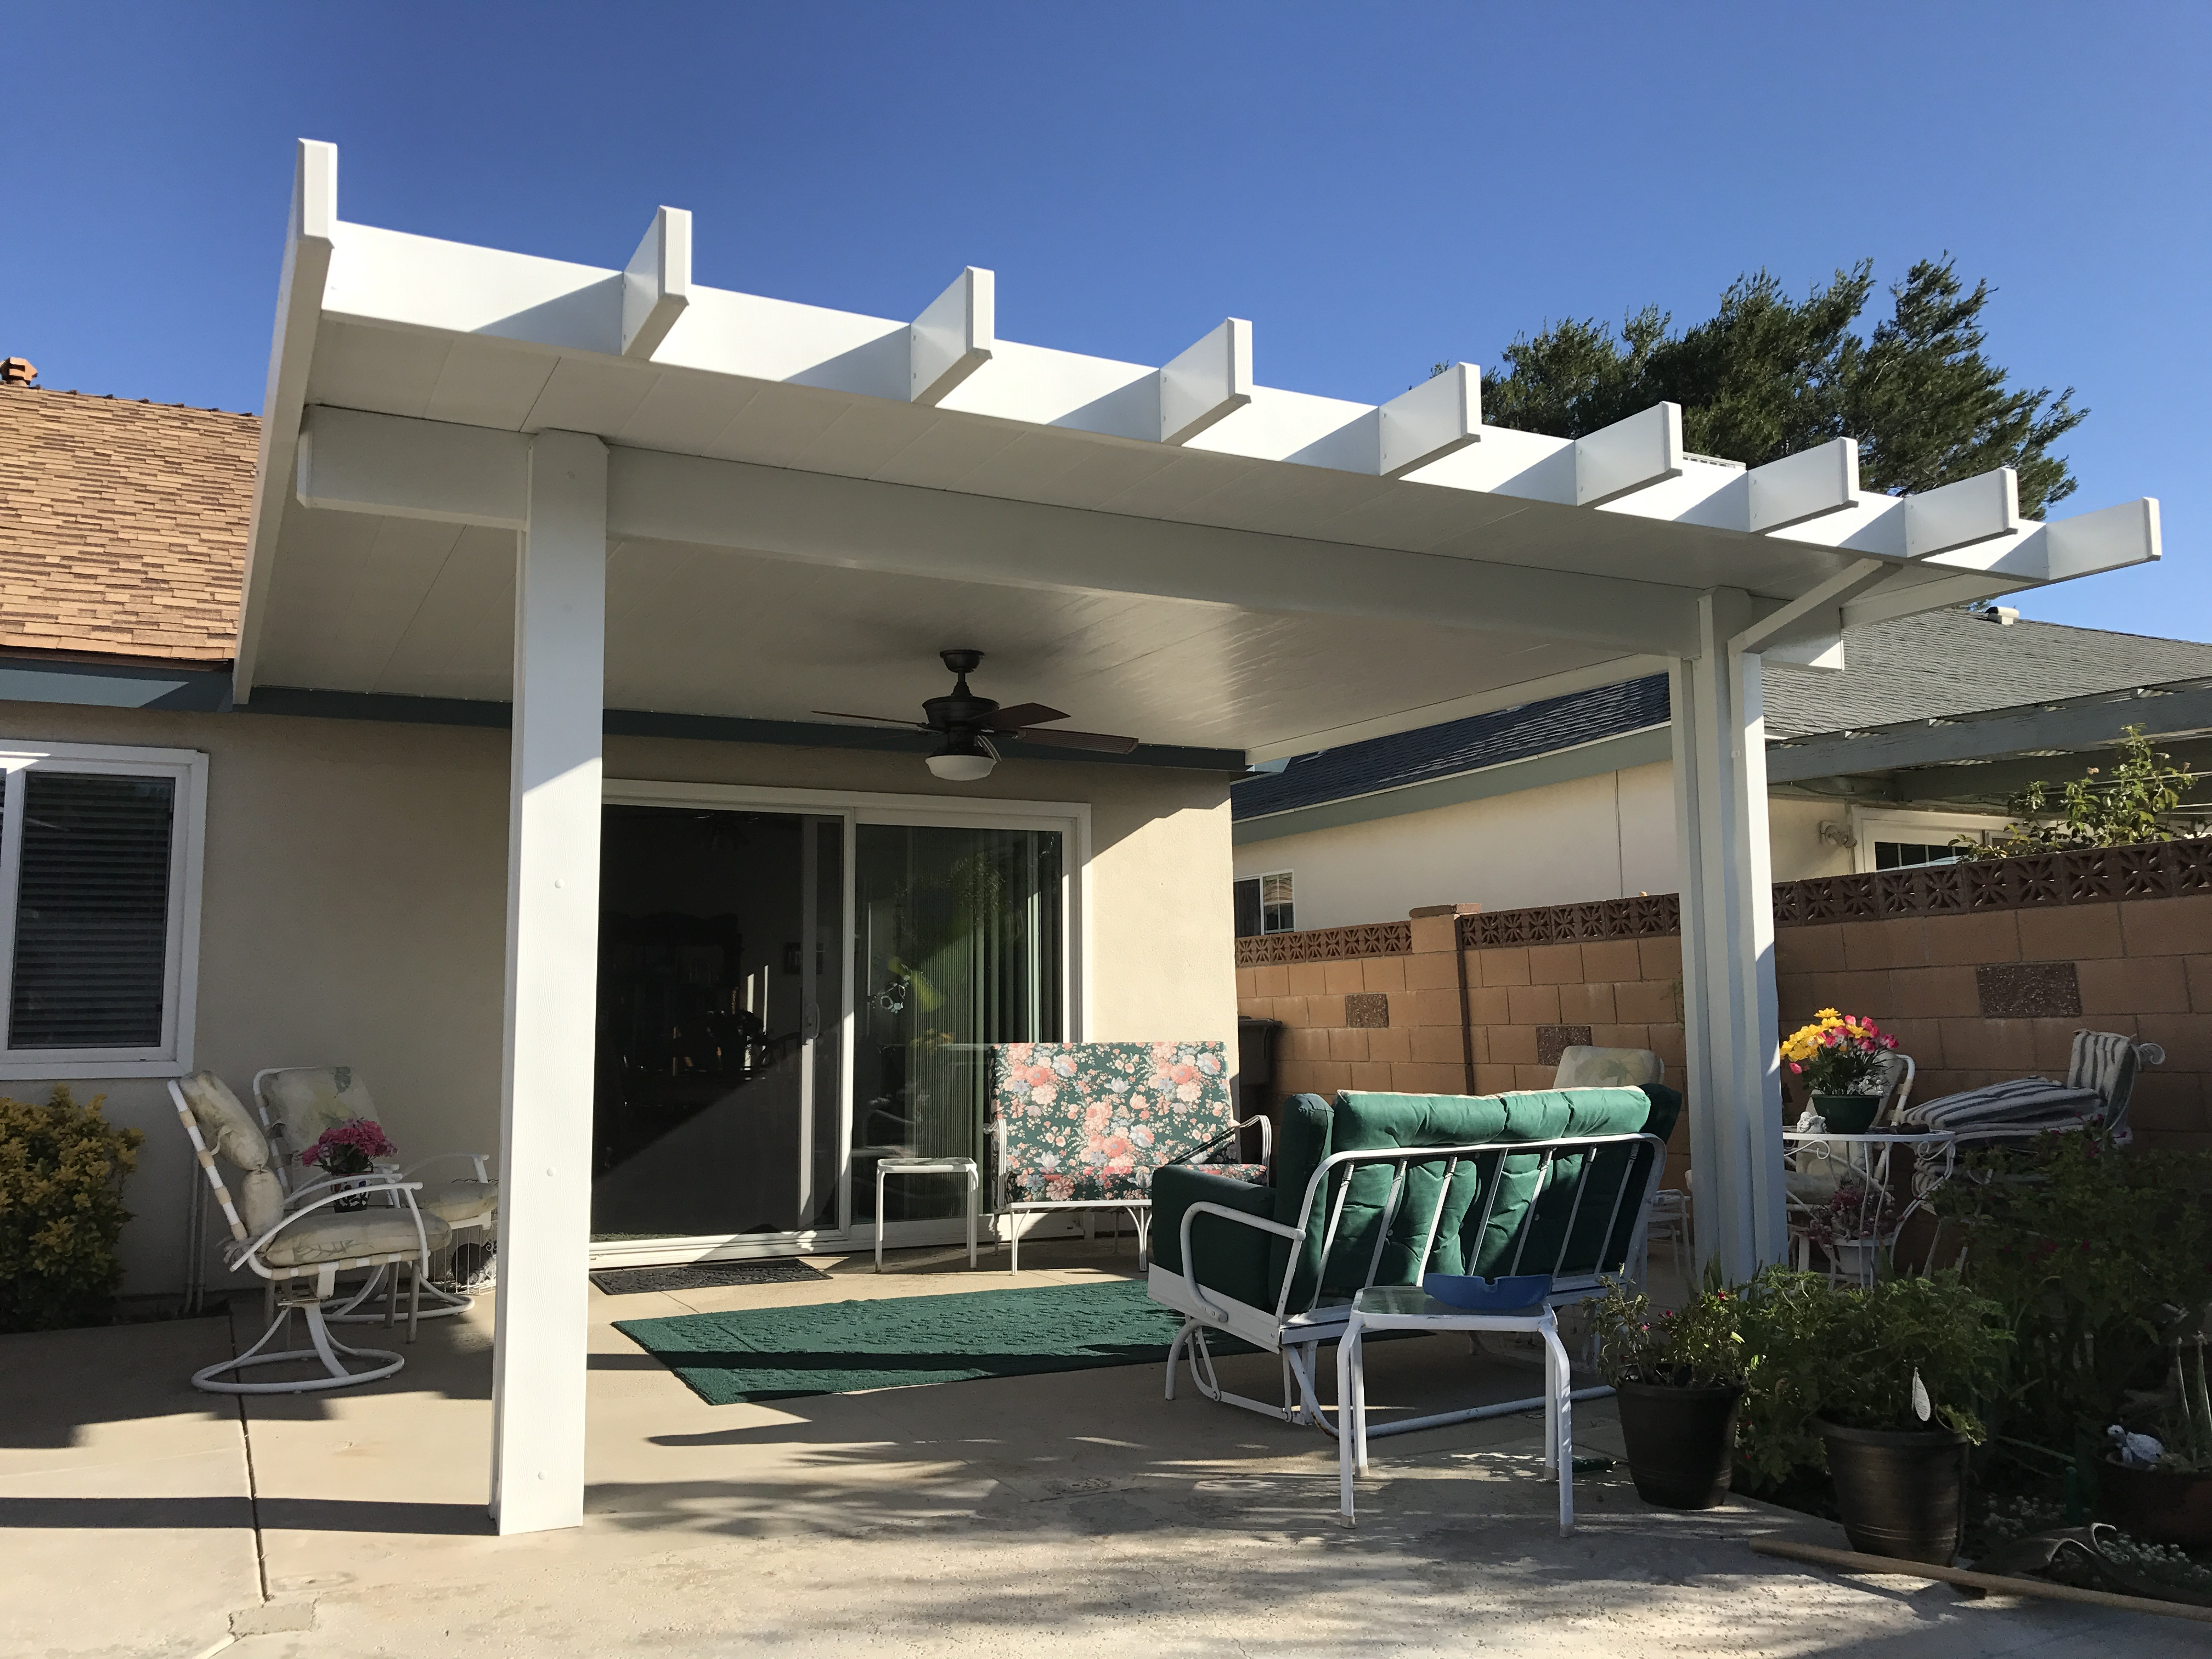 Alumawood Insulated Roofed Patio Cover Patiocovered regarding proportions 4032 X 3024